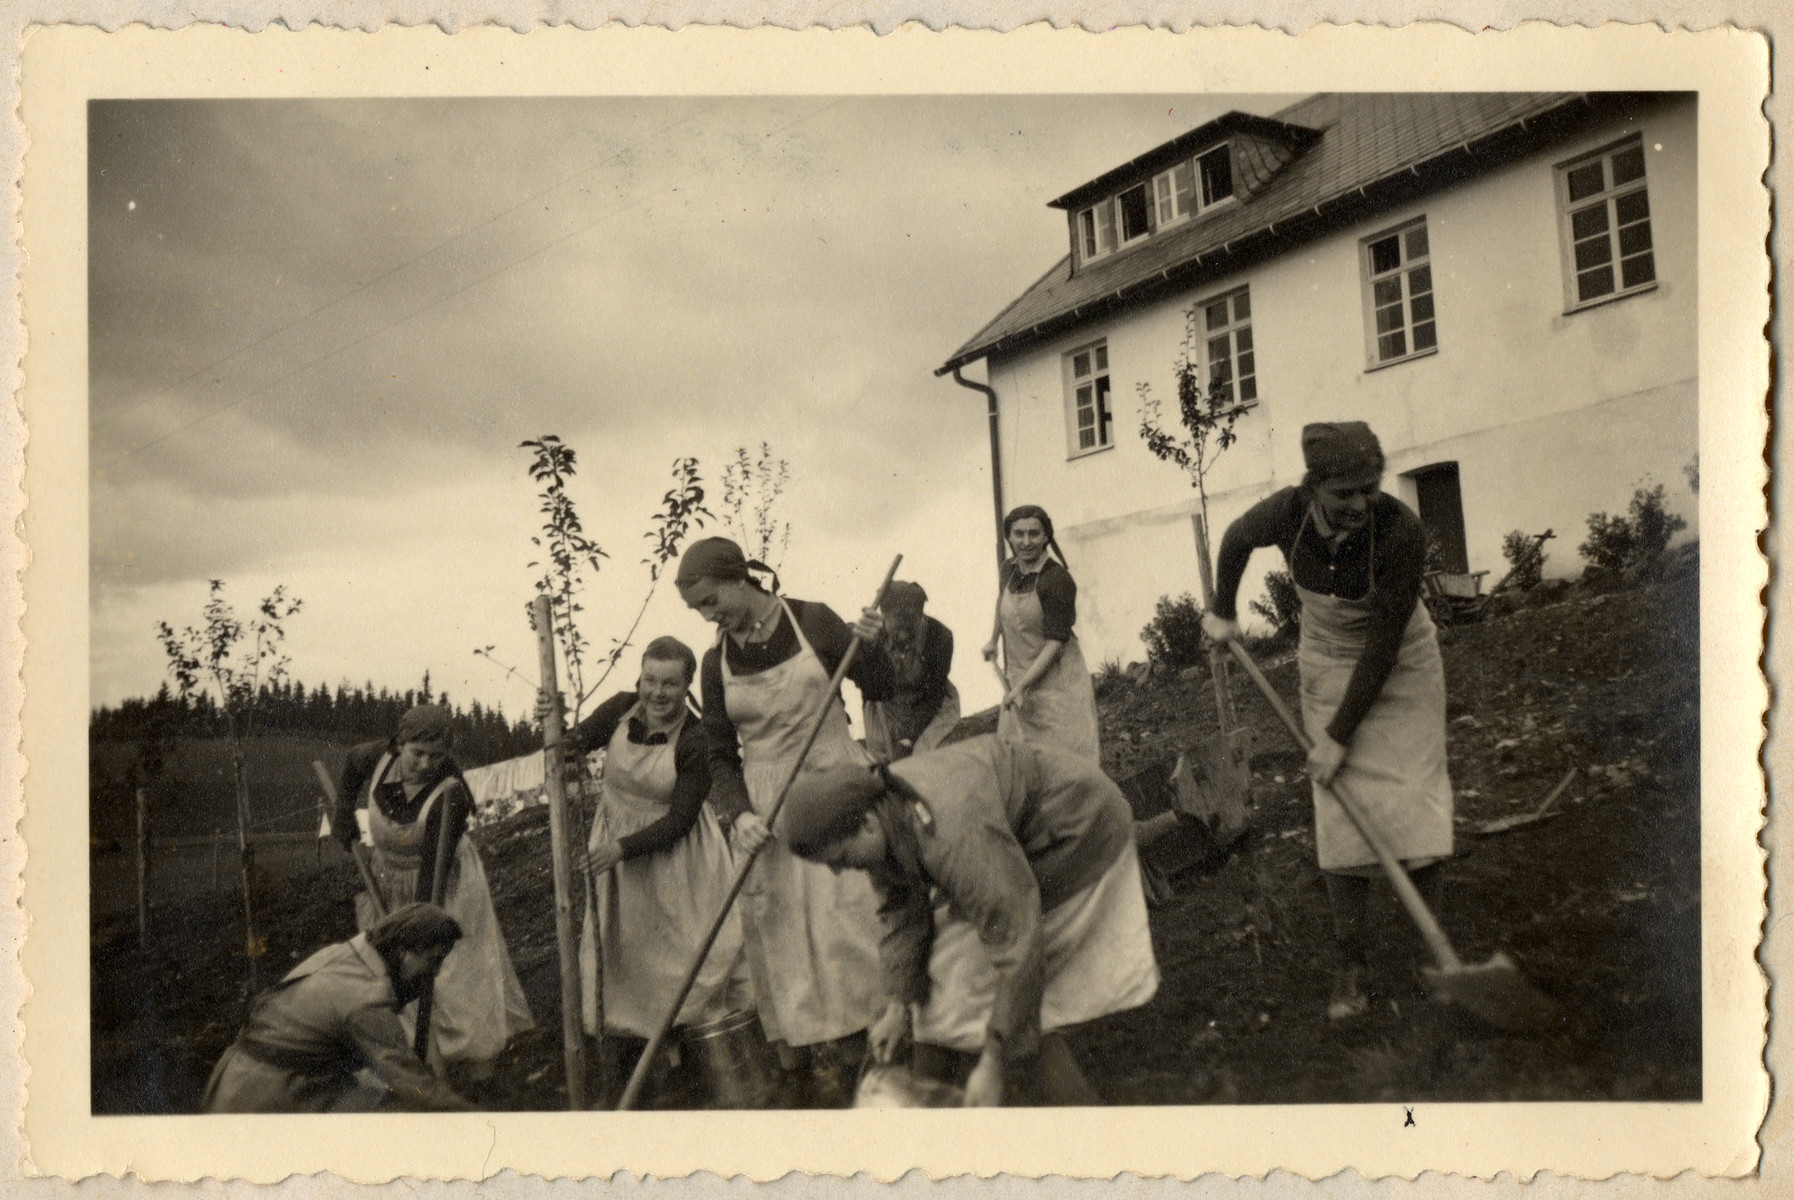 Young German women in the Reich Labor Service are photographed with agricultural tools on the estate where they are working.